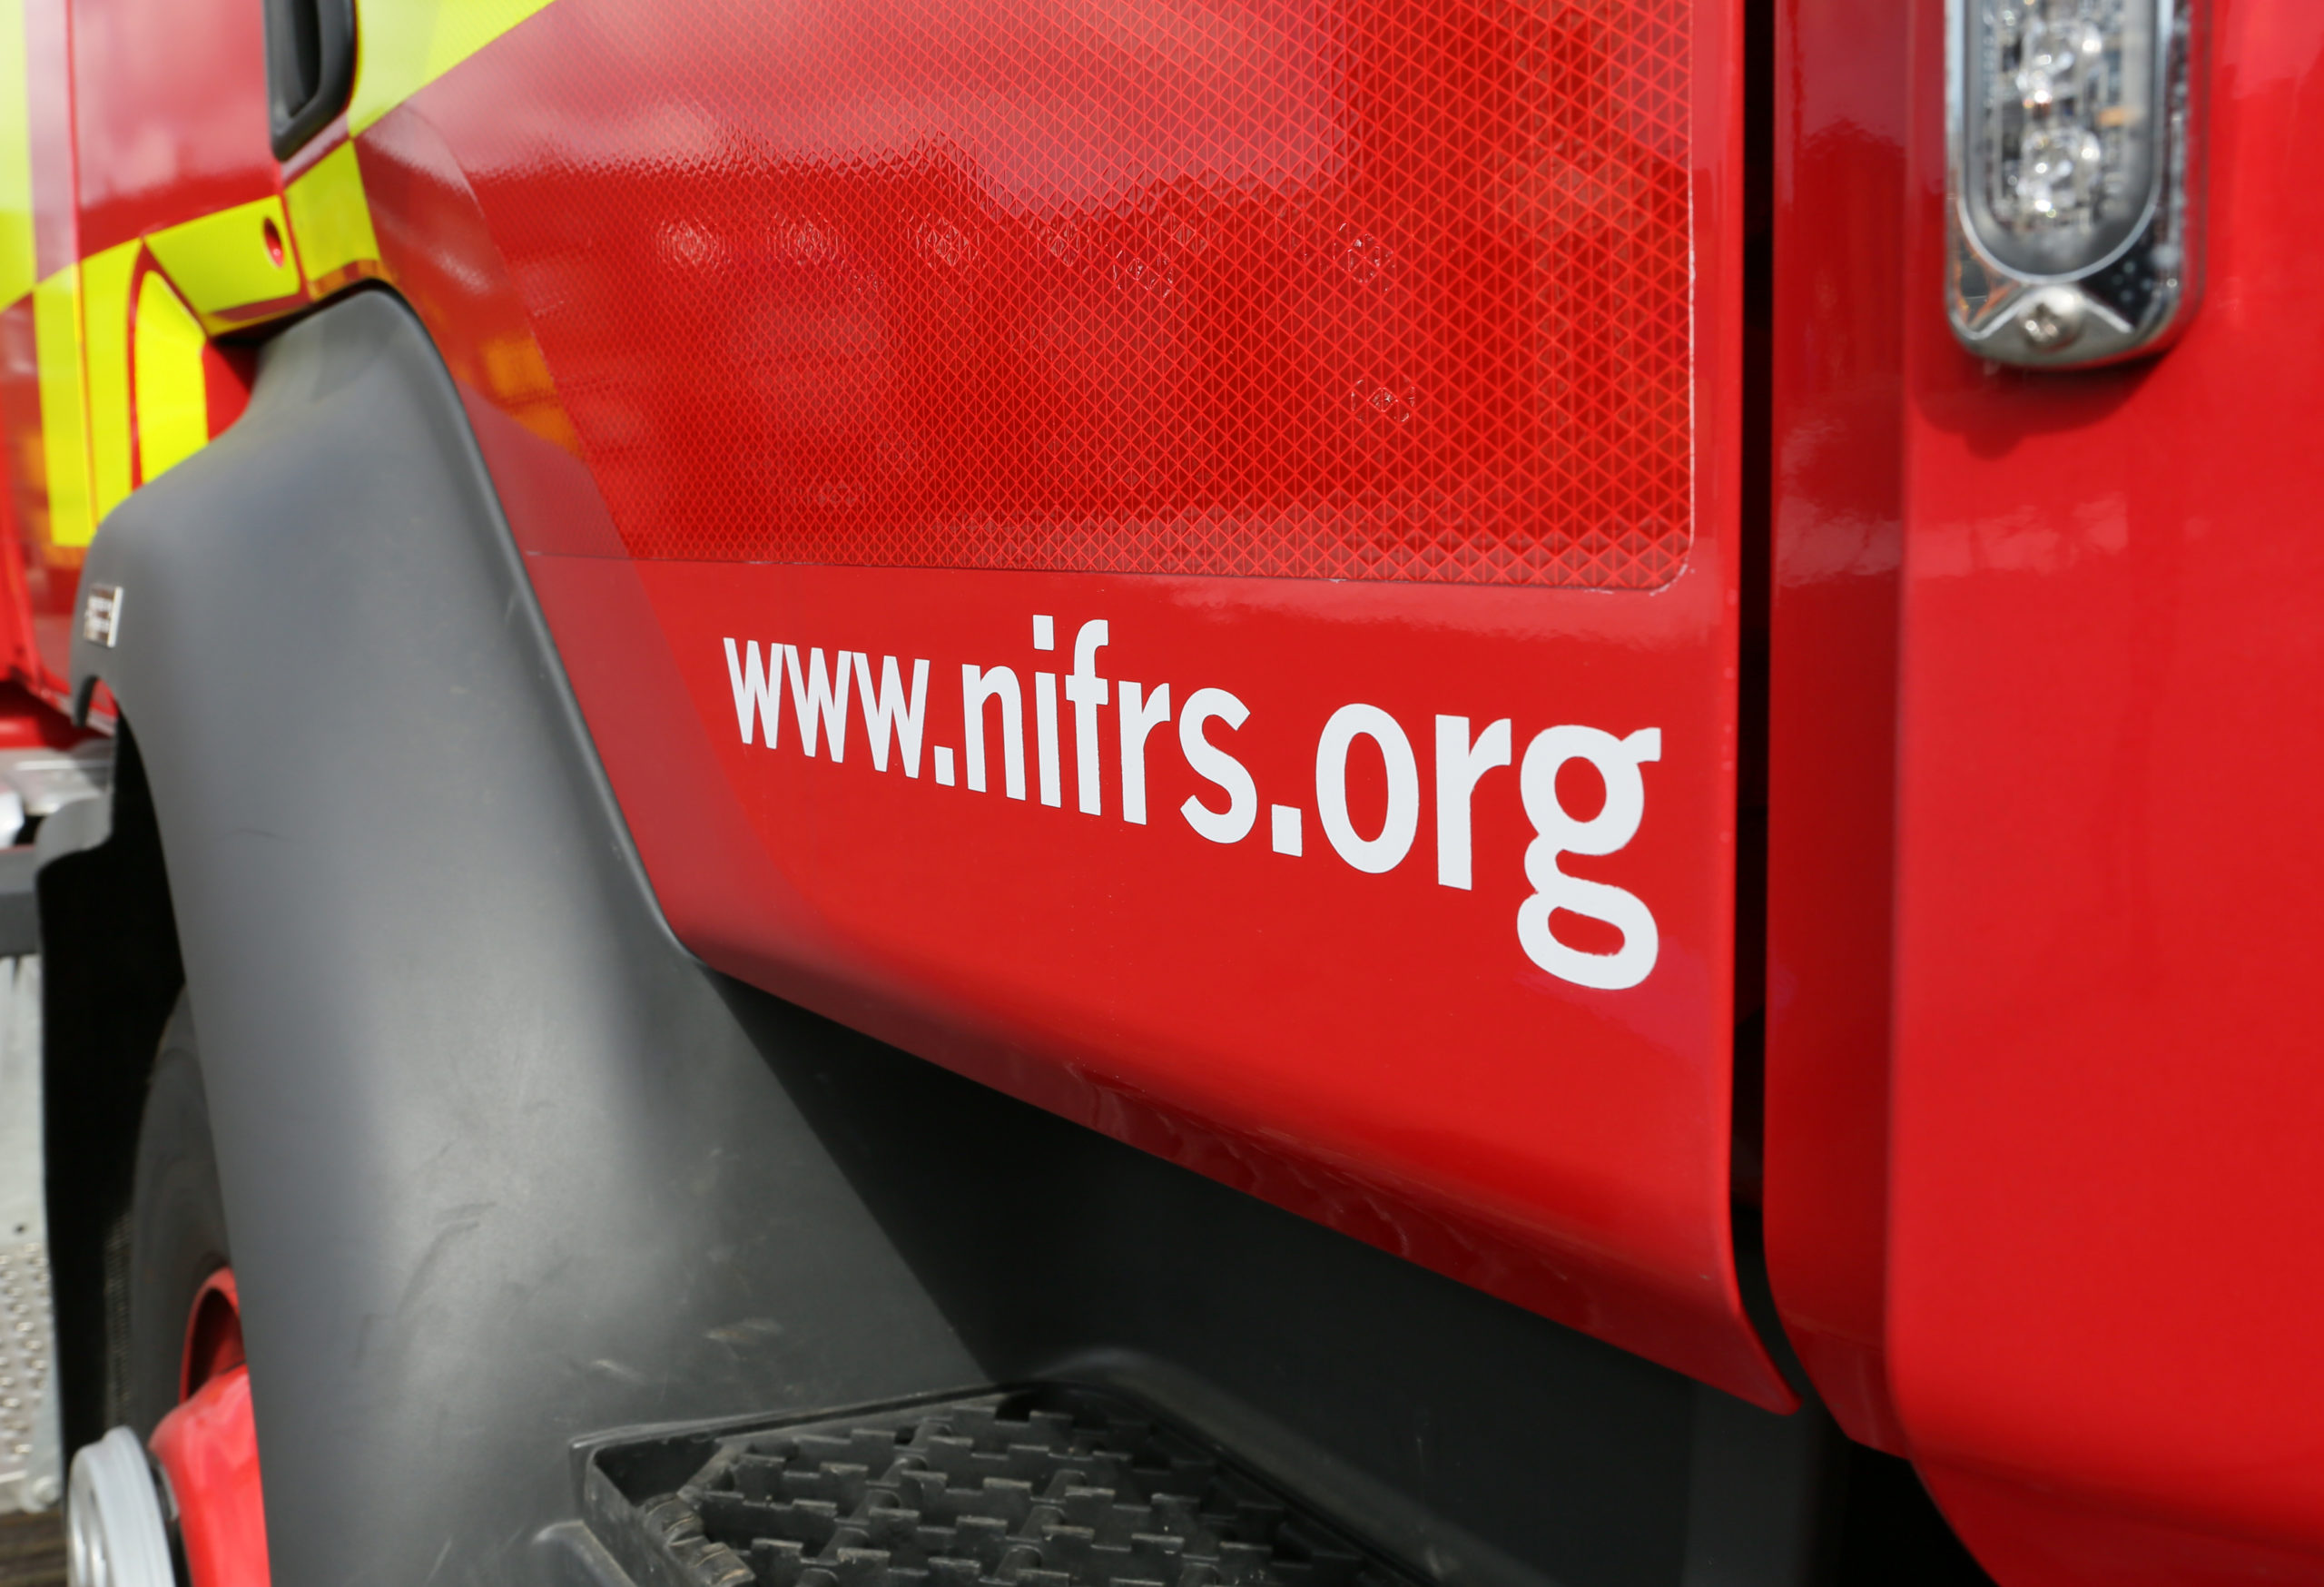 NIFRS - Find out more about this news article